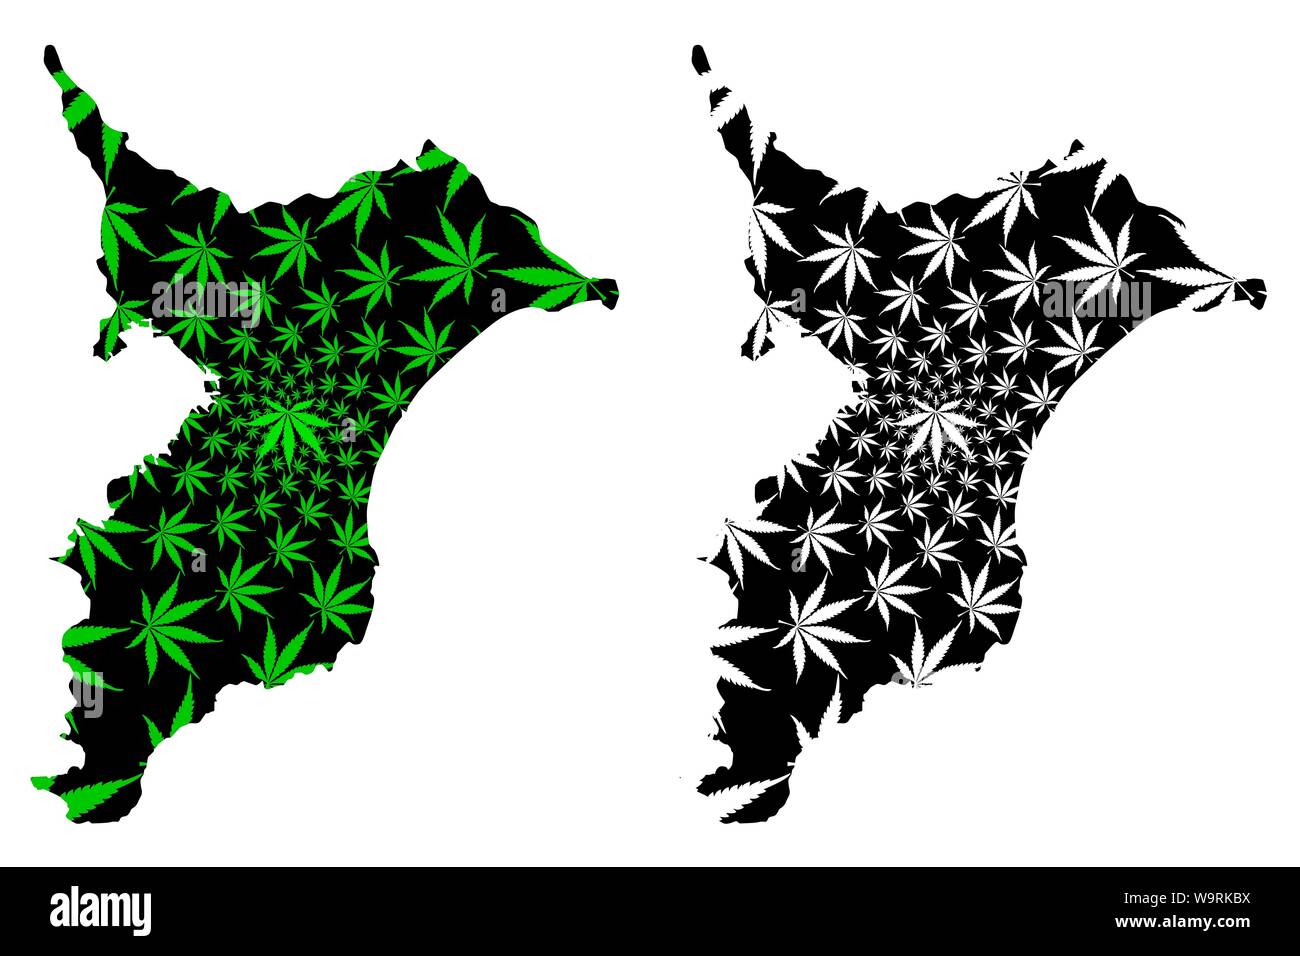 Chiba Prefecture (Administrative divisions of Japan, Prefectures of Japan) map is designed cannabis leaf green and black, Chiba map made of marijuana Stock Vector